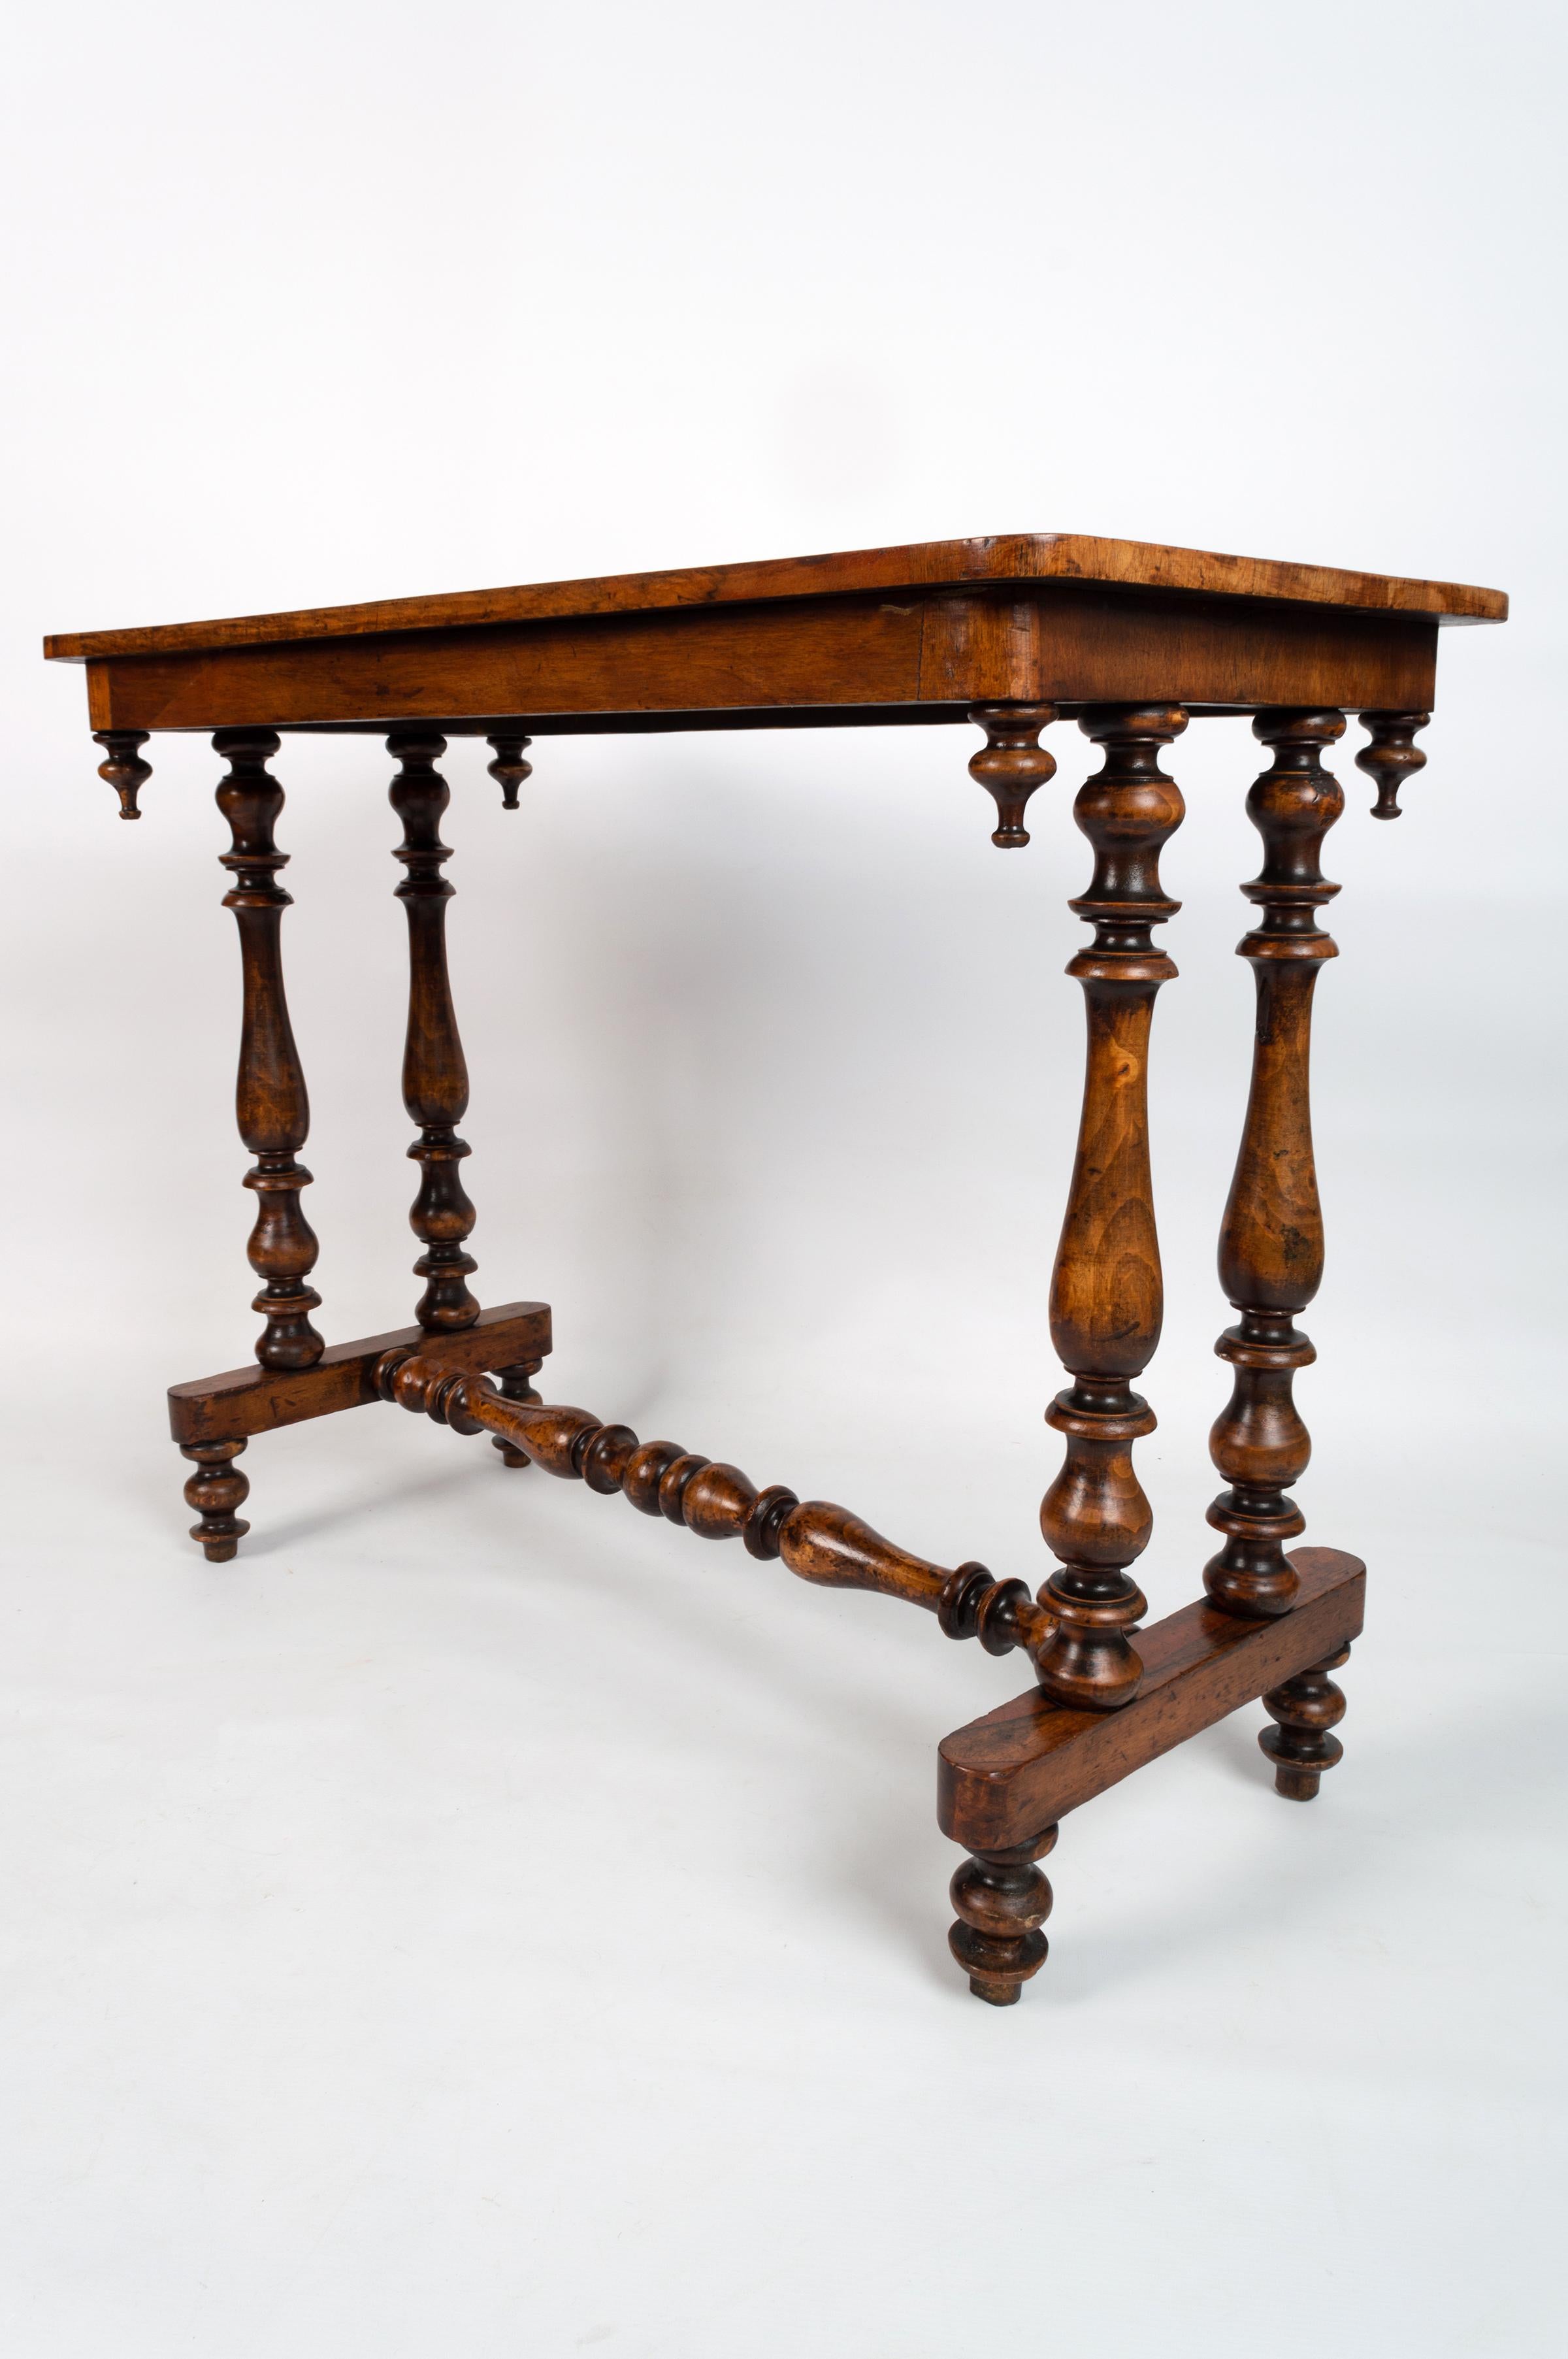 Antique English Edwardian Inlaid Walnut Hall Table Console C.1900 For Sale 1